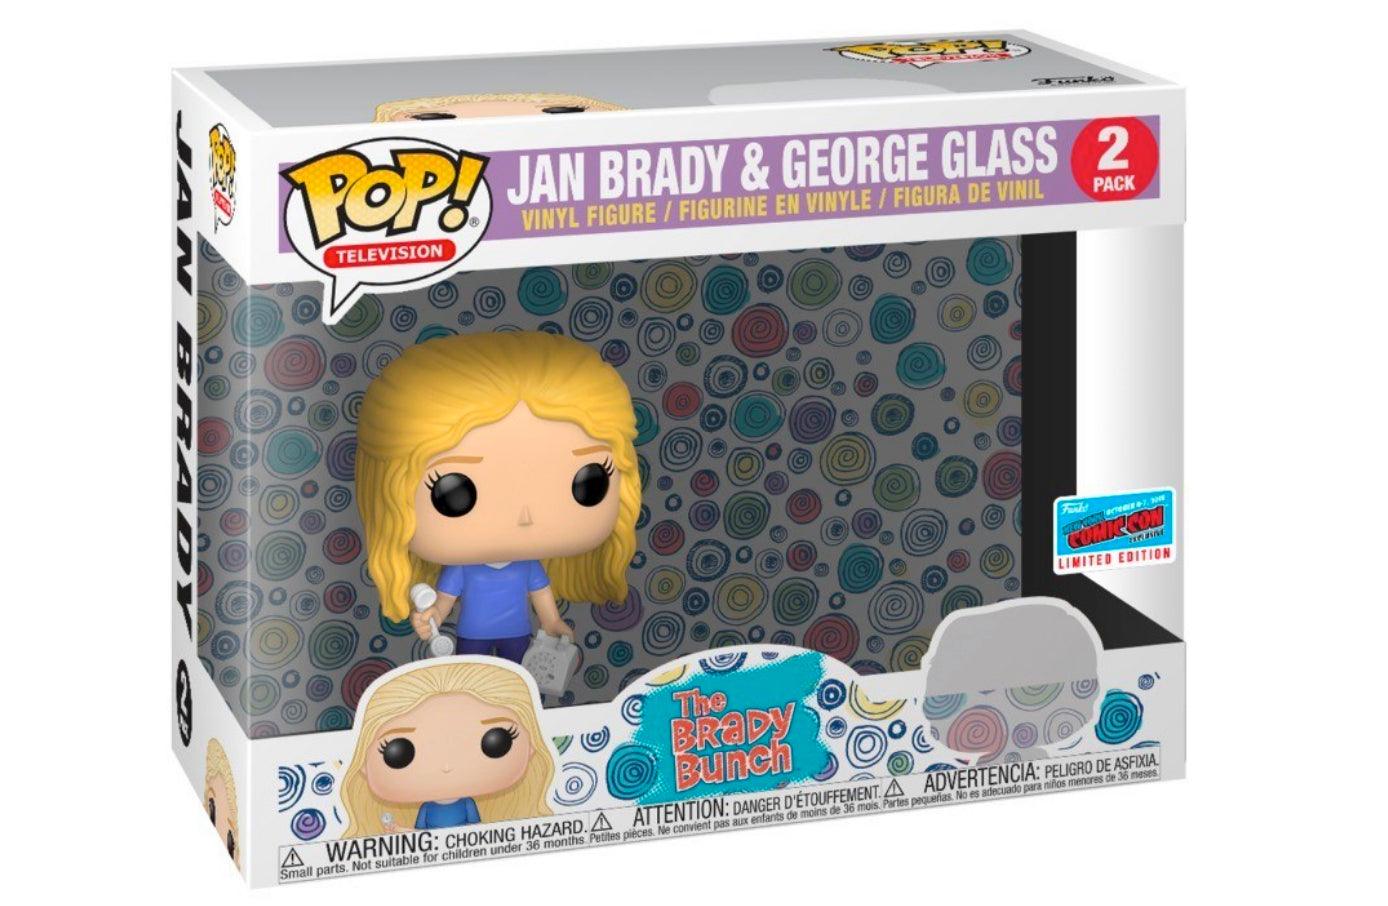 Pop! Television - The Brady Bunch - Jan Brady & George Glass - 2 Pack - EXCLUSIVE 2018 New York Comic Con - Hobby Champion Inc